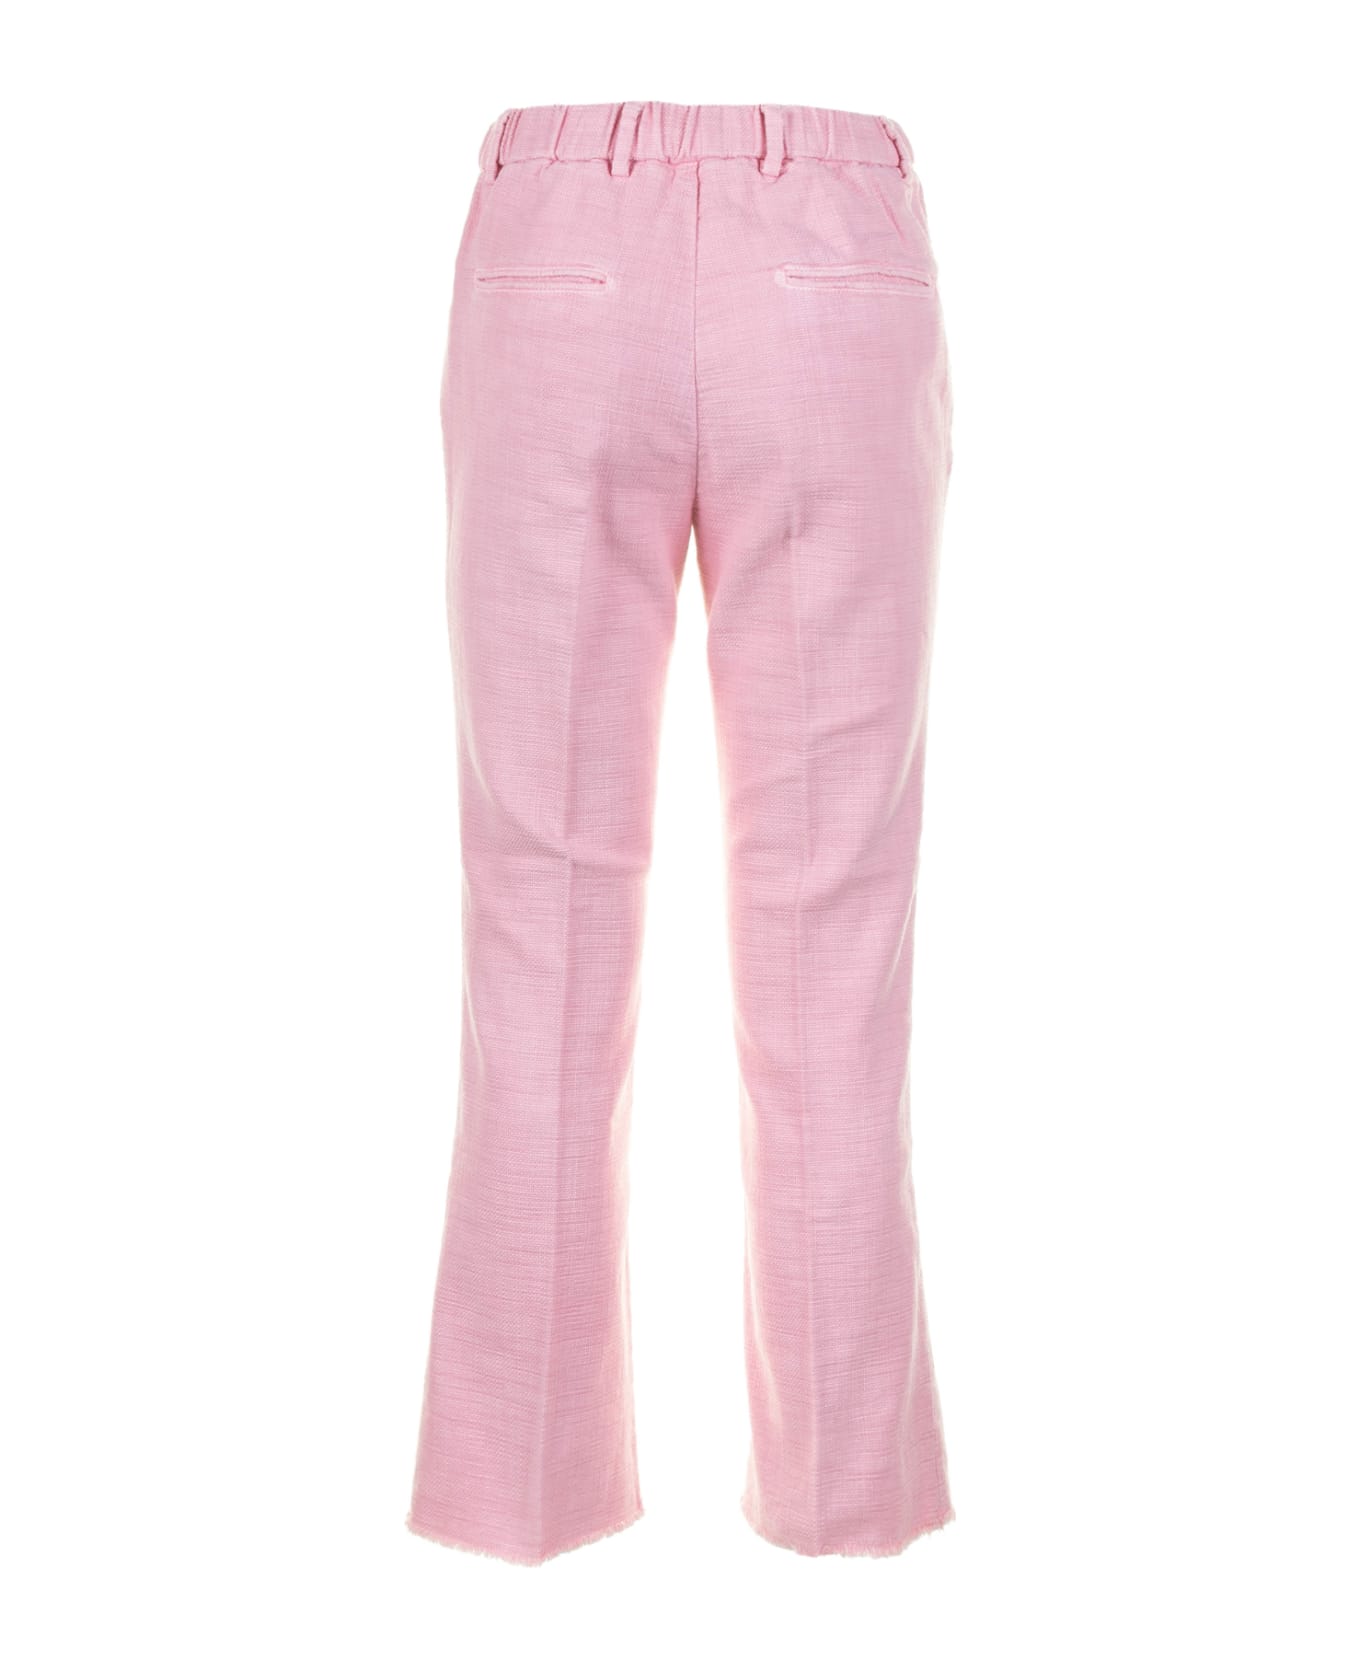 Myths Women's Pink Trousers - ROSA